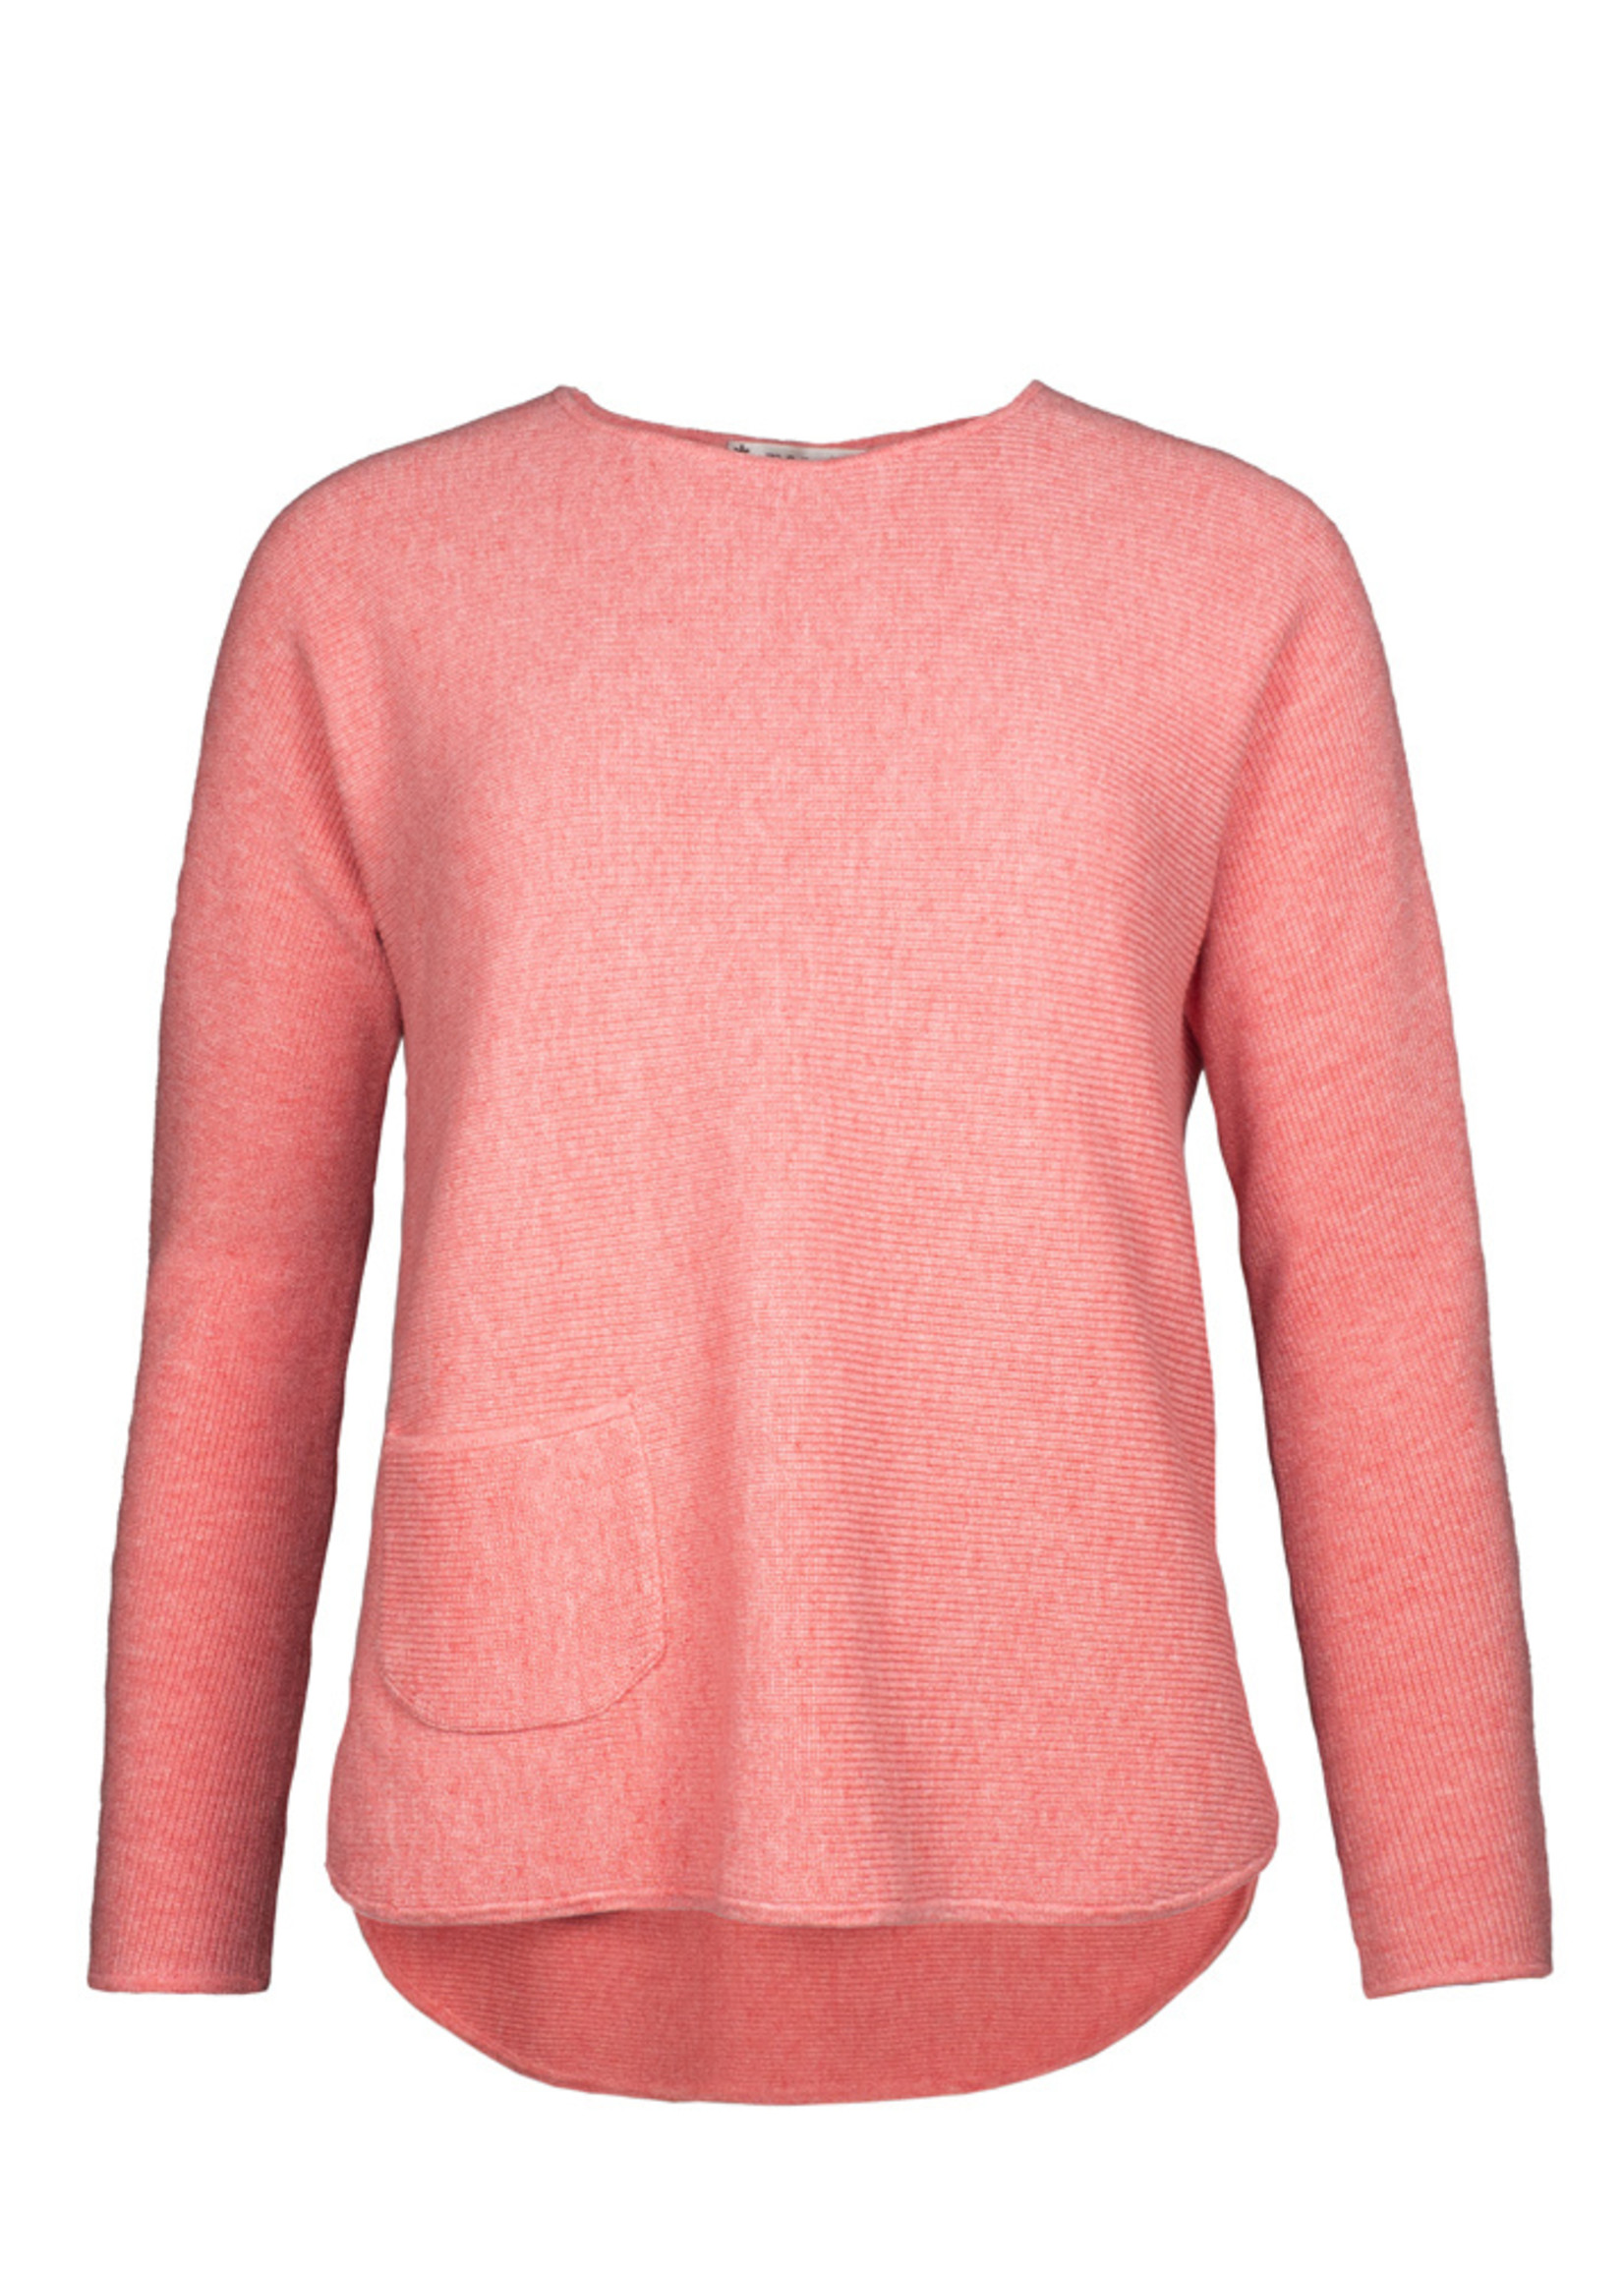 Mansted Crew Neck Sweater with Pocket